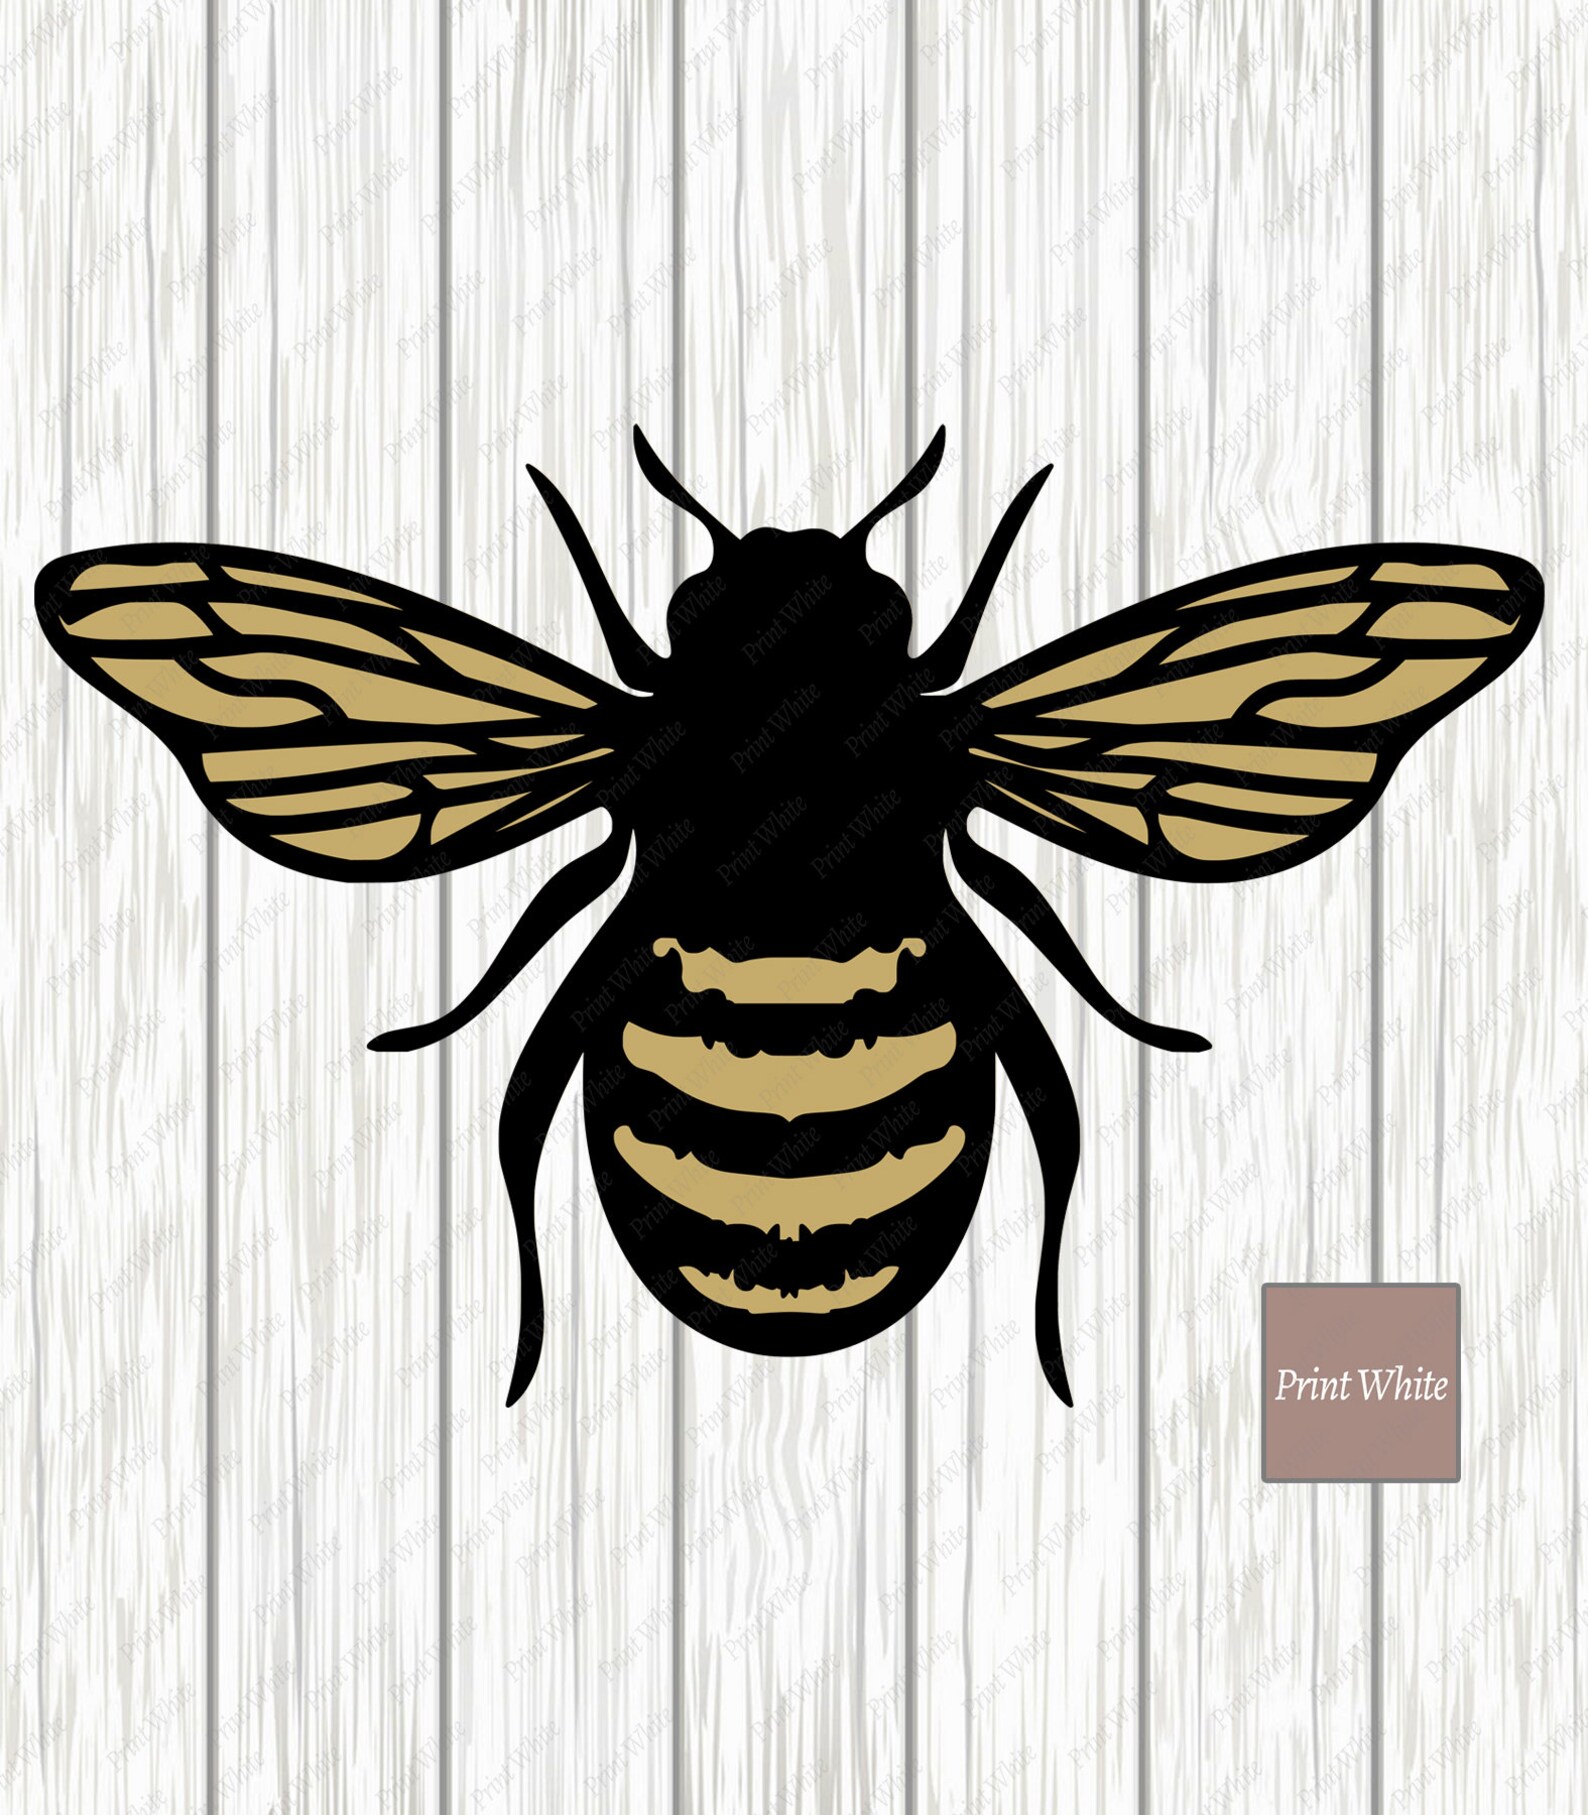 Drawing of a bee on a wooden background.